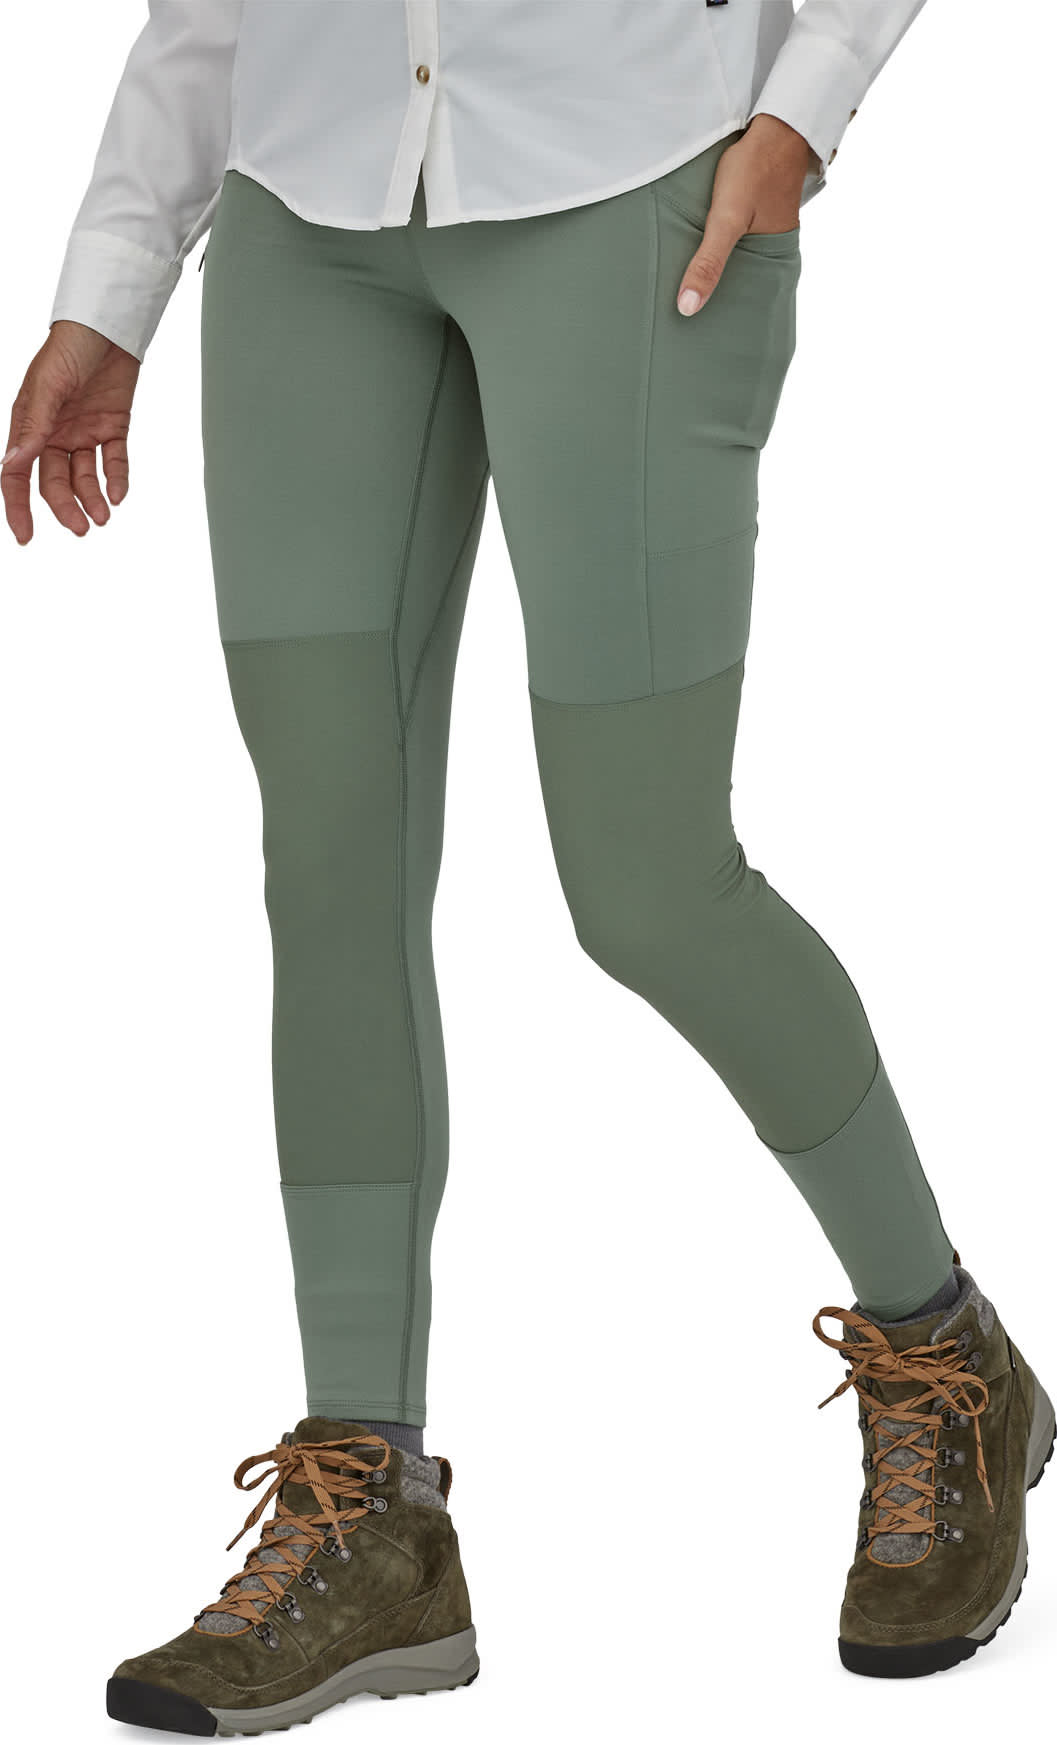 https://www.fjellsport.no/assets/blobs/patagonia-women-s-pack-out-hike-tights-c02-hemlock-green-277bf761e1.jpeg